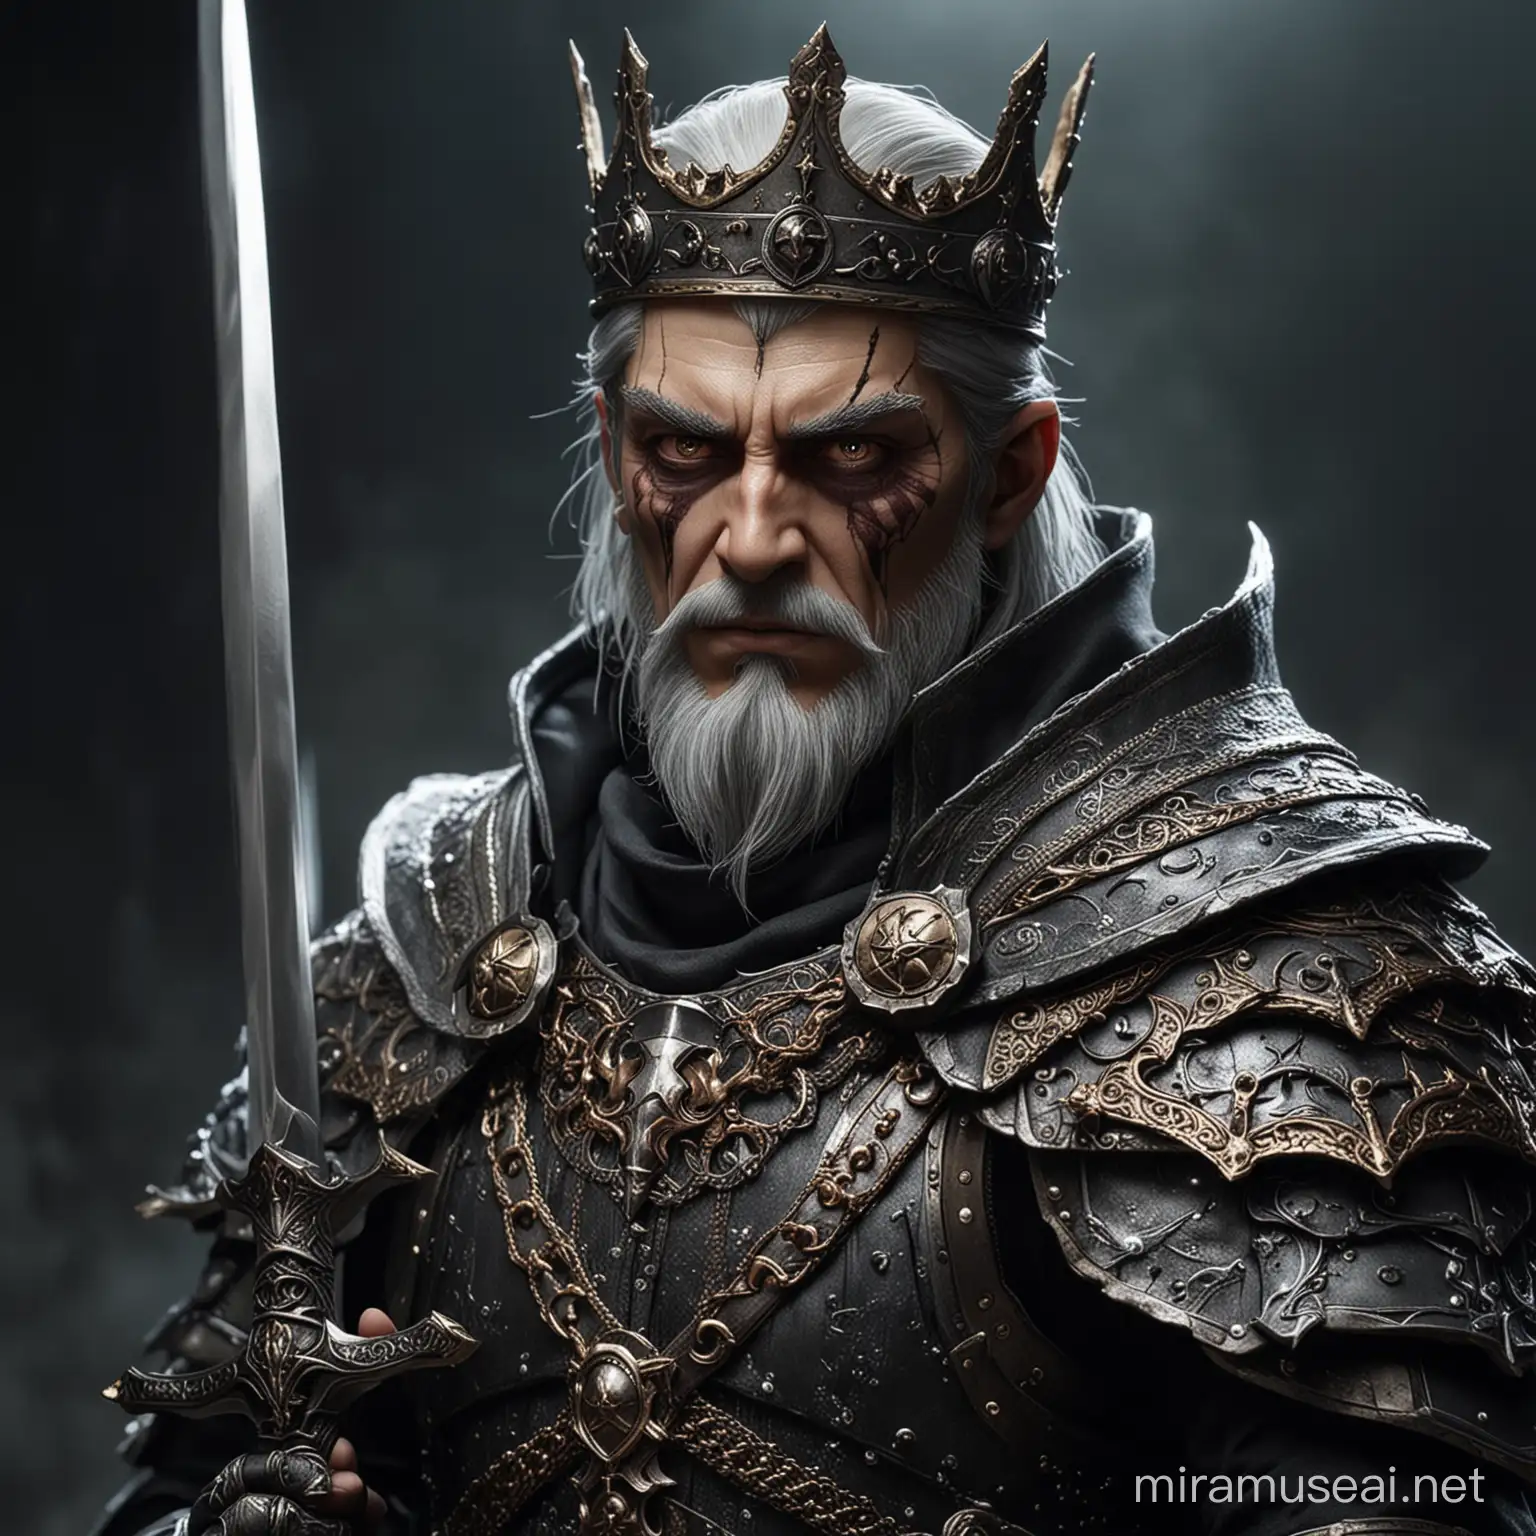 The wizard king of wizards, kill, is a powerful man with his demonic dolls. He is the strongest wizard in the world.
"Image of a knight without a beard,
Slightly resembling a manhwa,
Arrogant magic-wielding king."